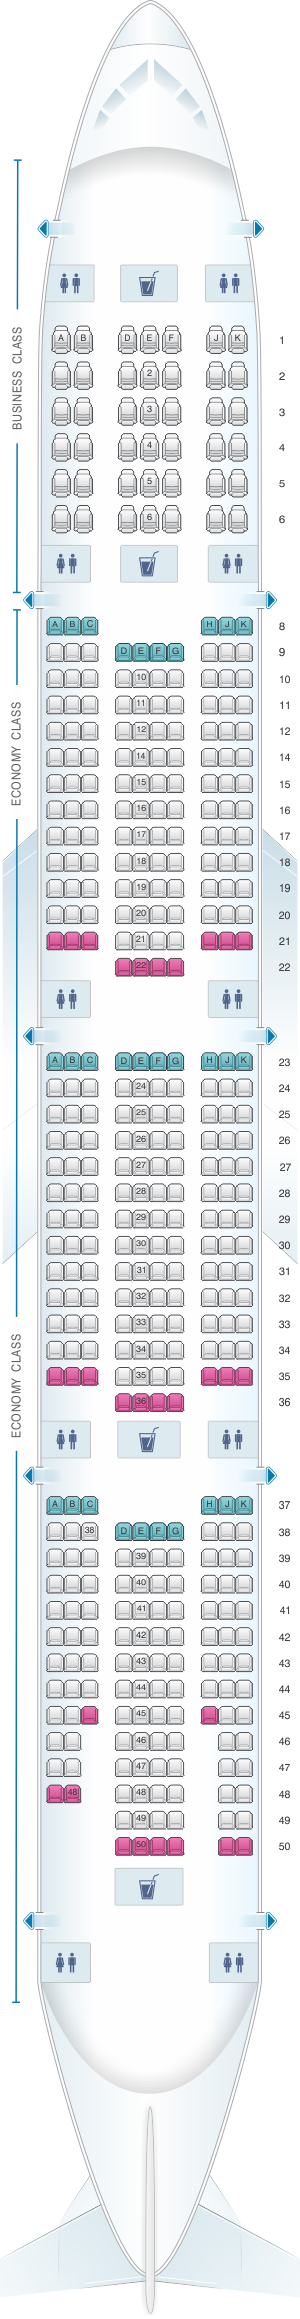 Seat map for Emirates Boeing B777 300ER two class